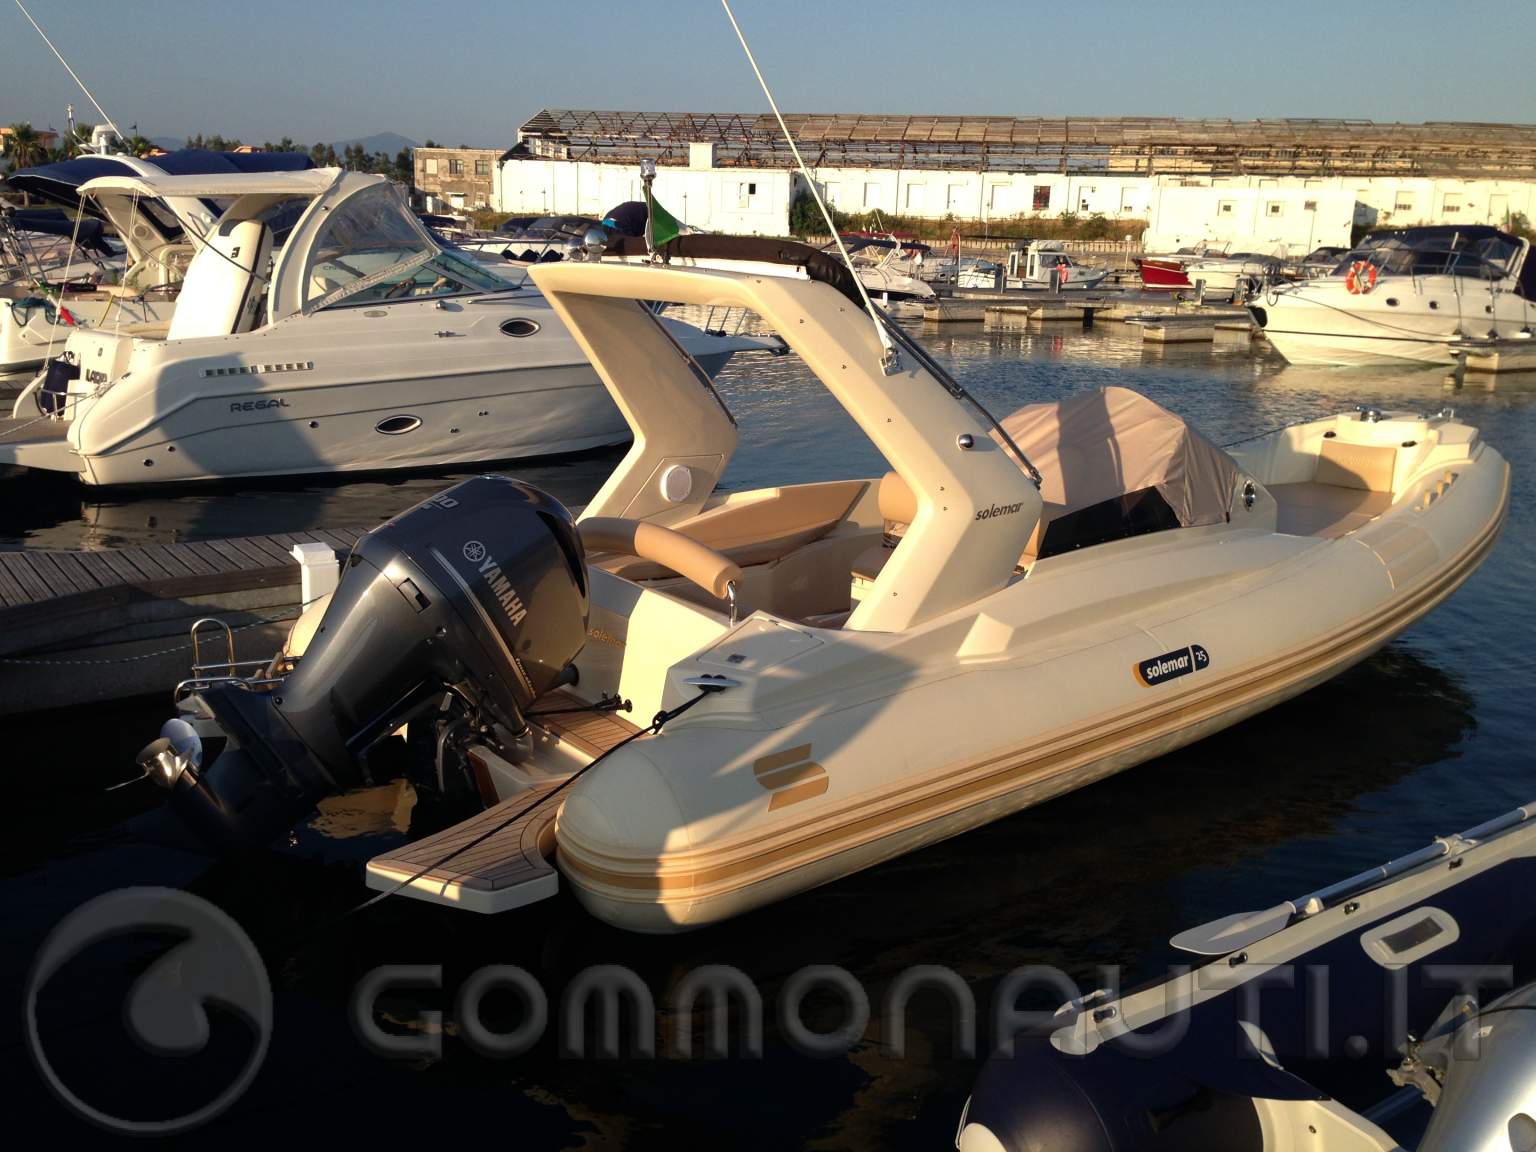 Gommone Solemar Offshore 25.1 Yamaha F300B 300 HP 4 tempi